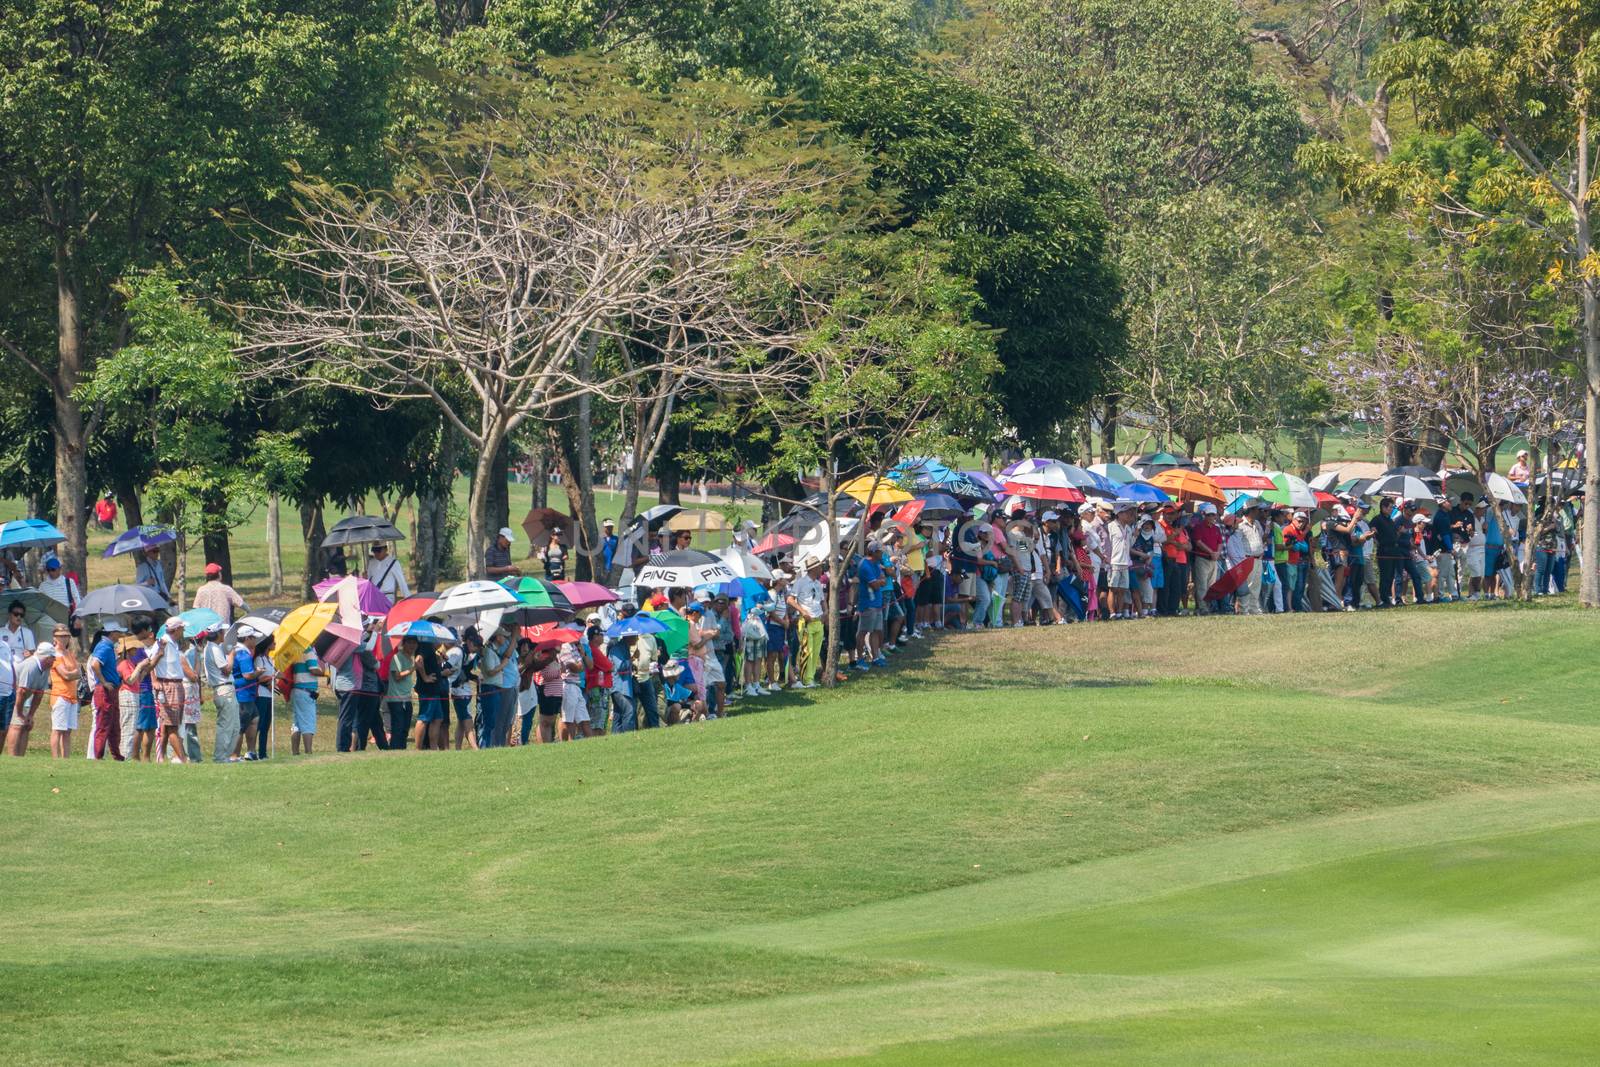 CHONBURI - FEBRUARY 28 : Many people wait for a match  in Honda LPGA Thailand 2016 at Siam Country Club, Pattaya Old Course on February 28, 2016 in Chonburi, Thailand.